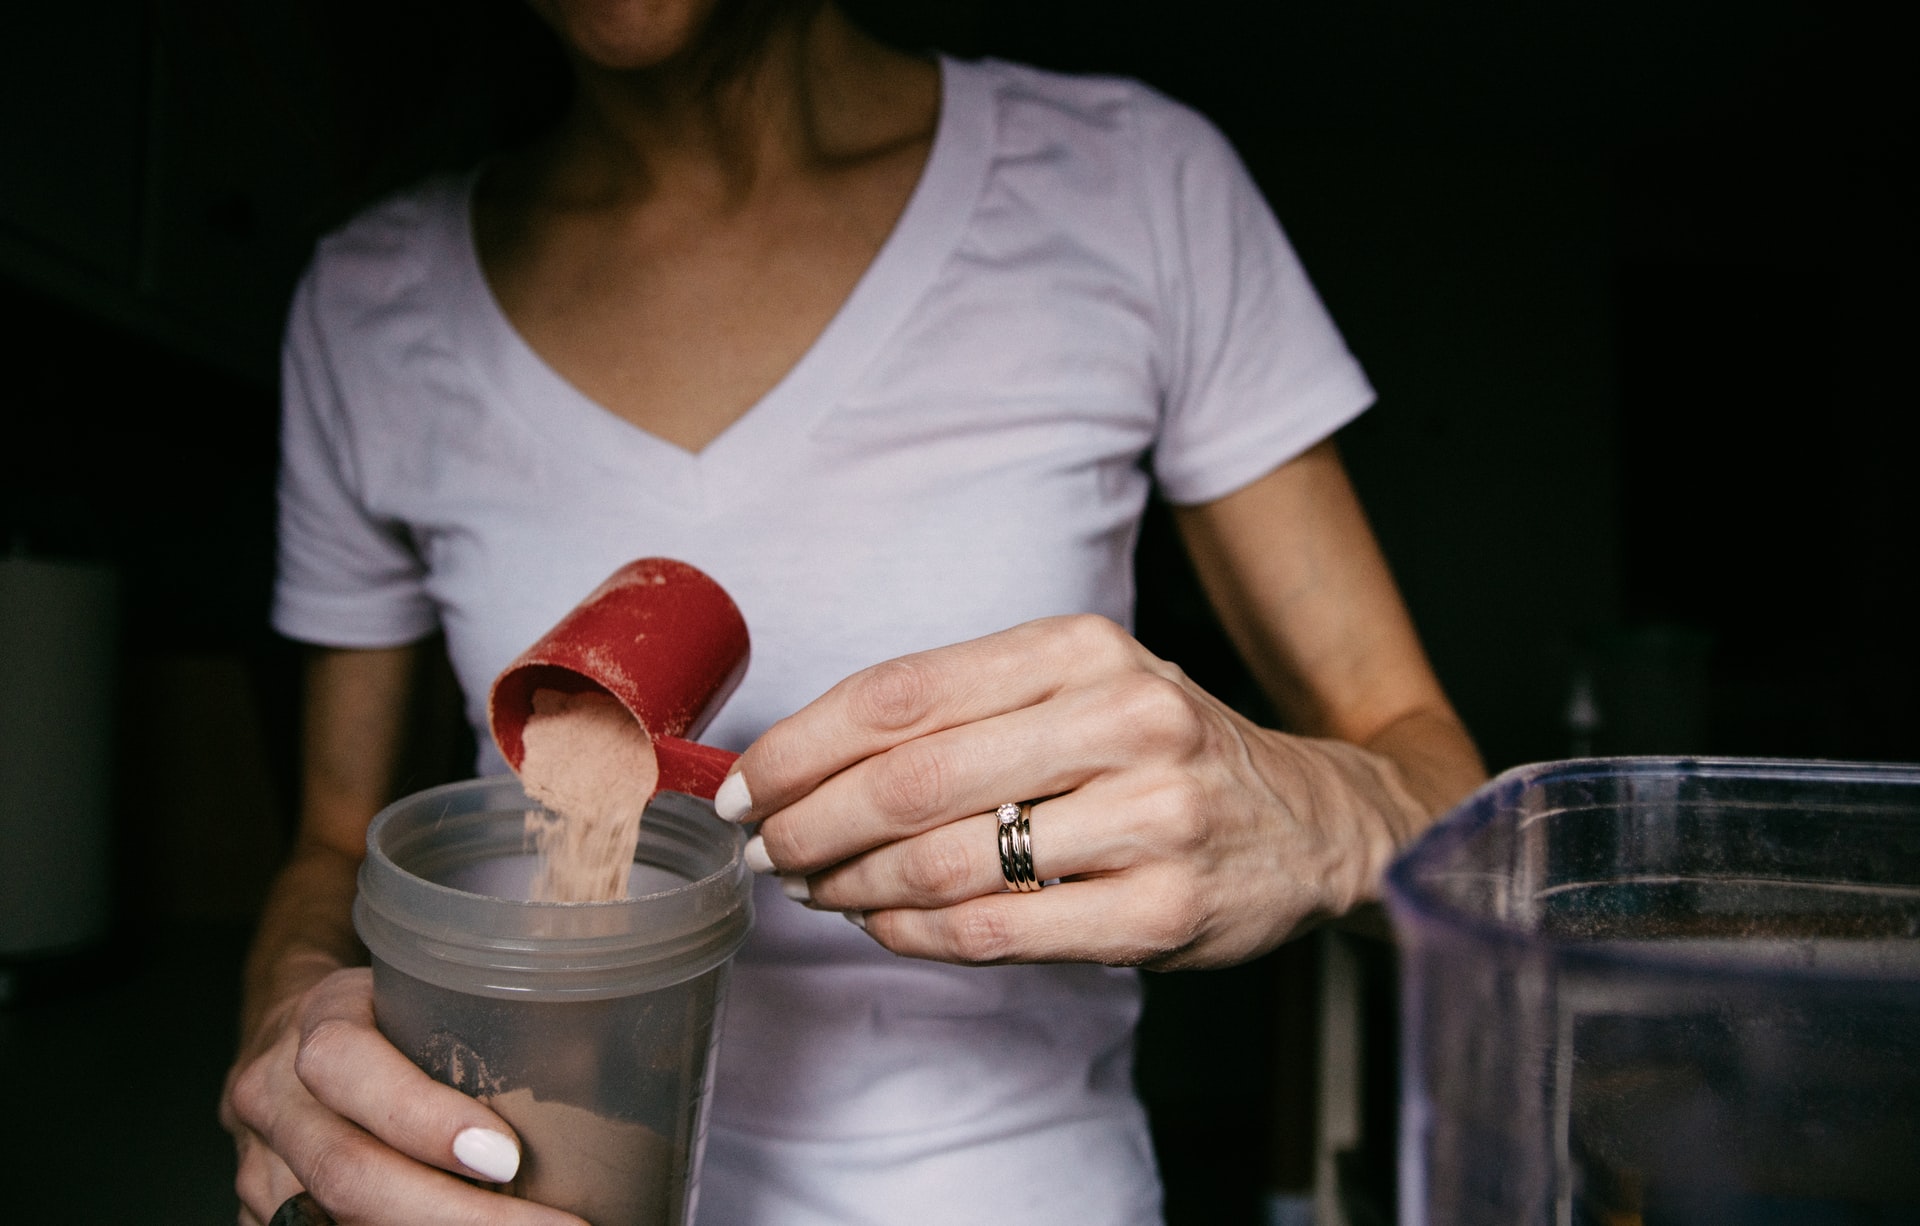 Why Our Customers Love This Protein Shake